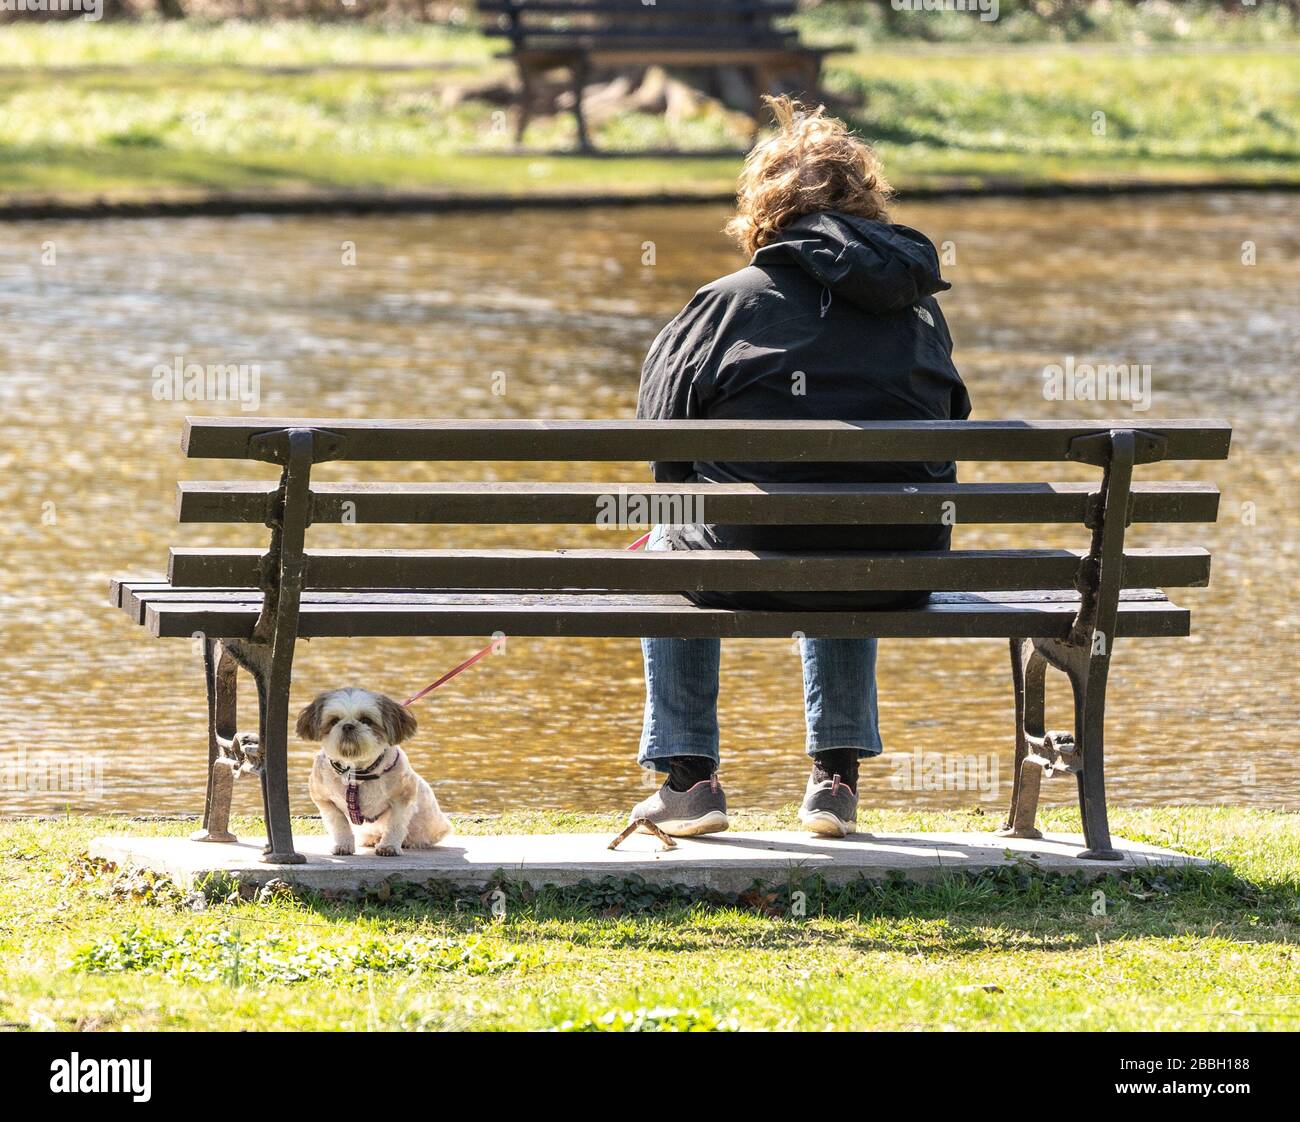 Berks County, Pennsylvania, USA-March 22, 2020: Senior woman sits on park bench next to pond with dog under the bench. Stock Photo